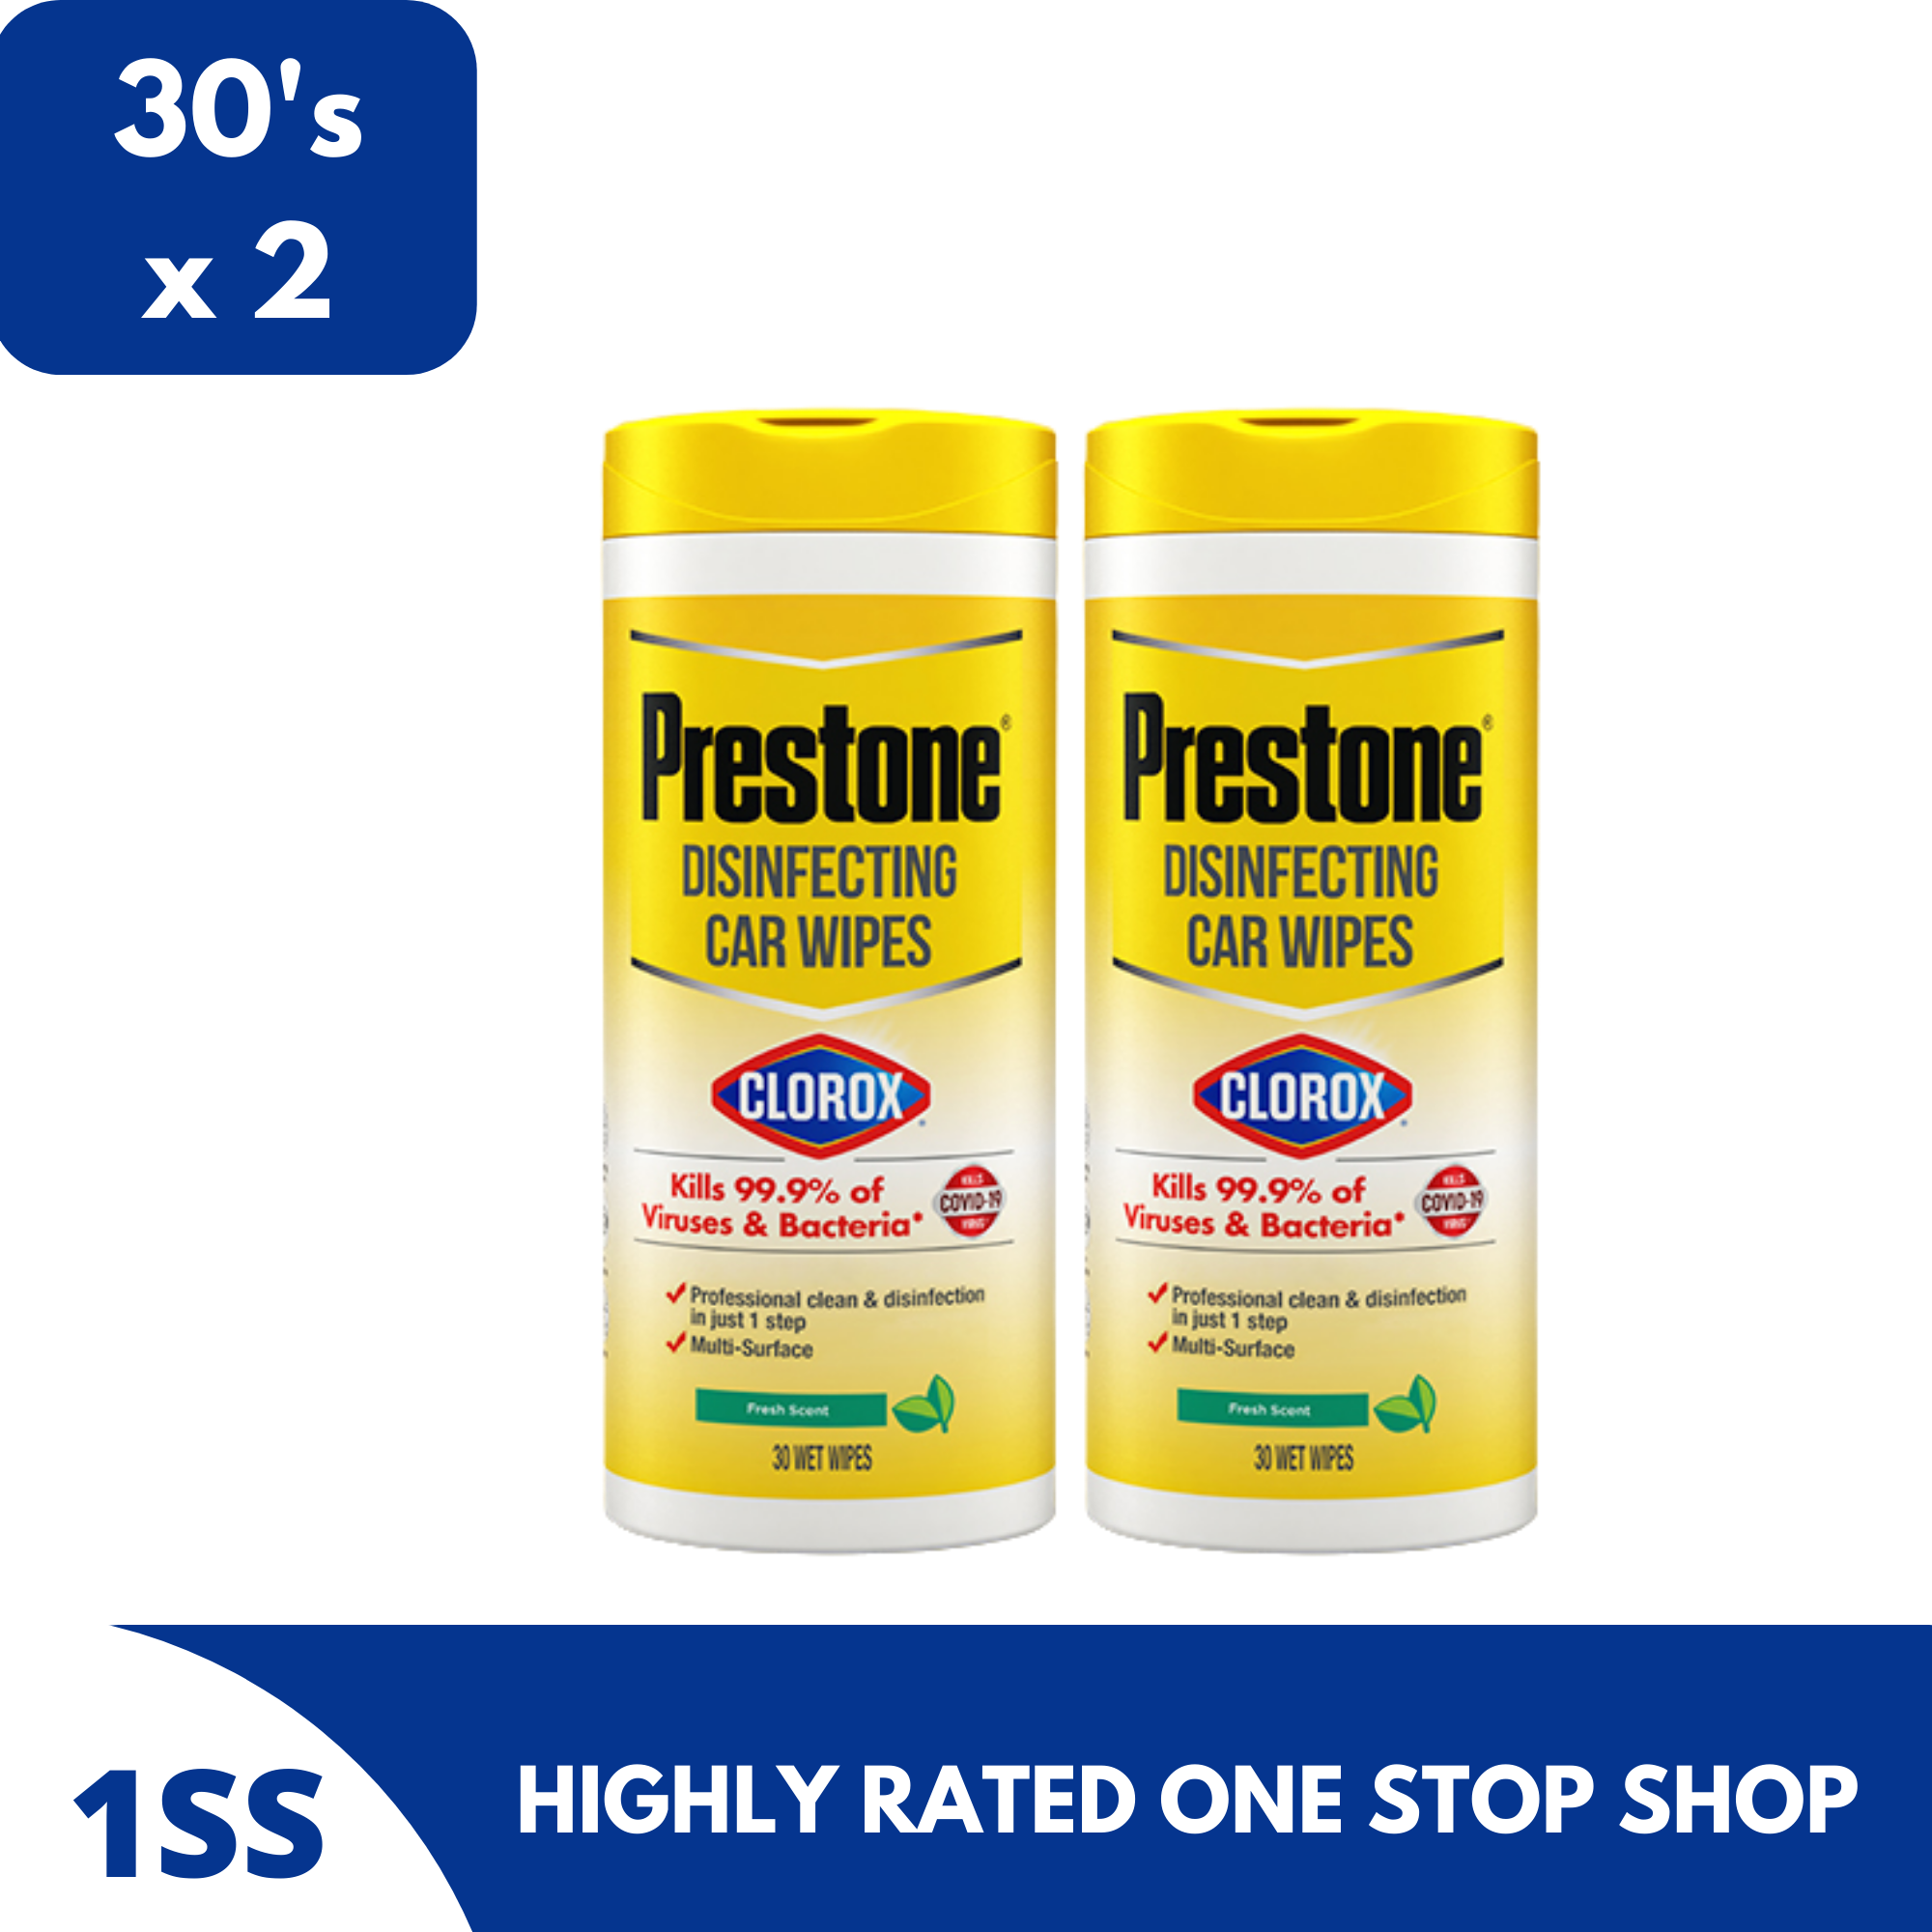 Prestone Car Wipes with Clorox Professional Disinfection 